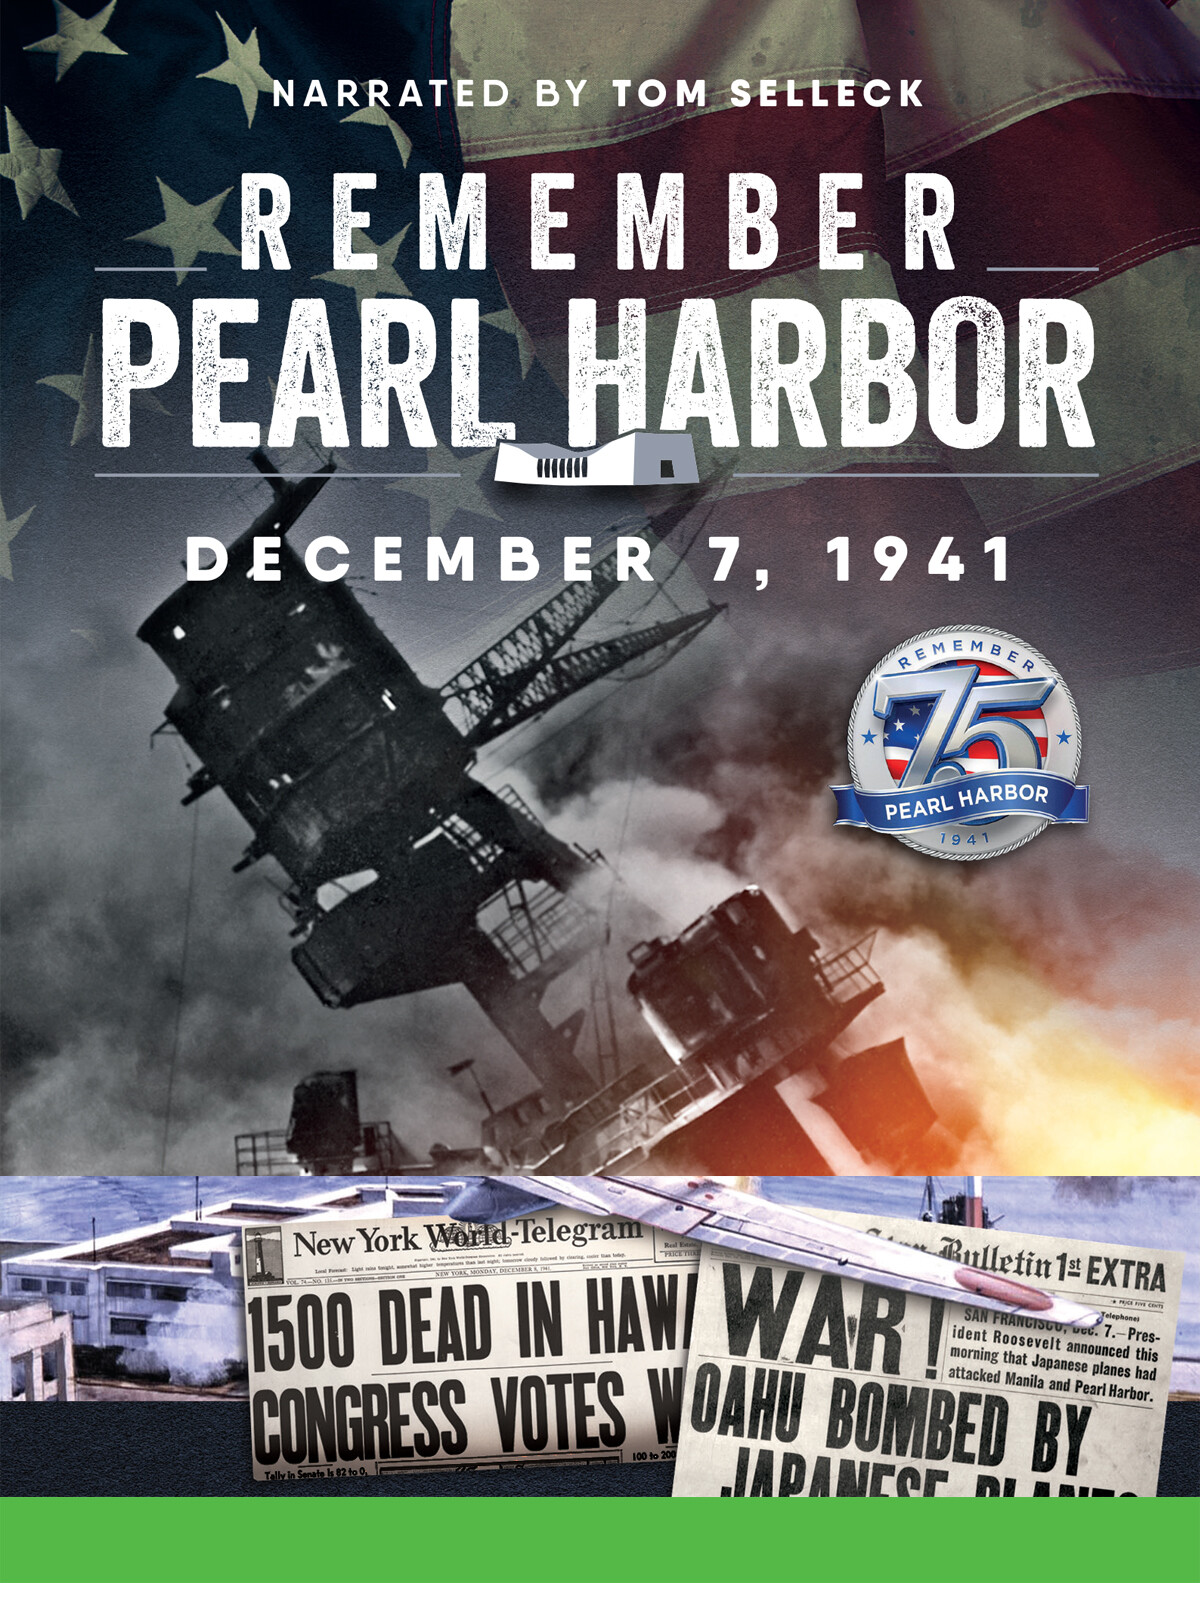 JW2616 - Remember Pearl Harbor Narrated by Tom Selleck